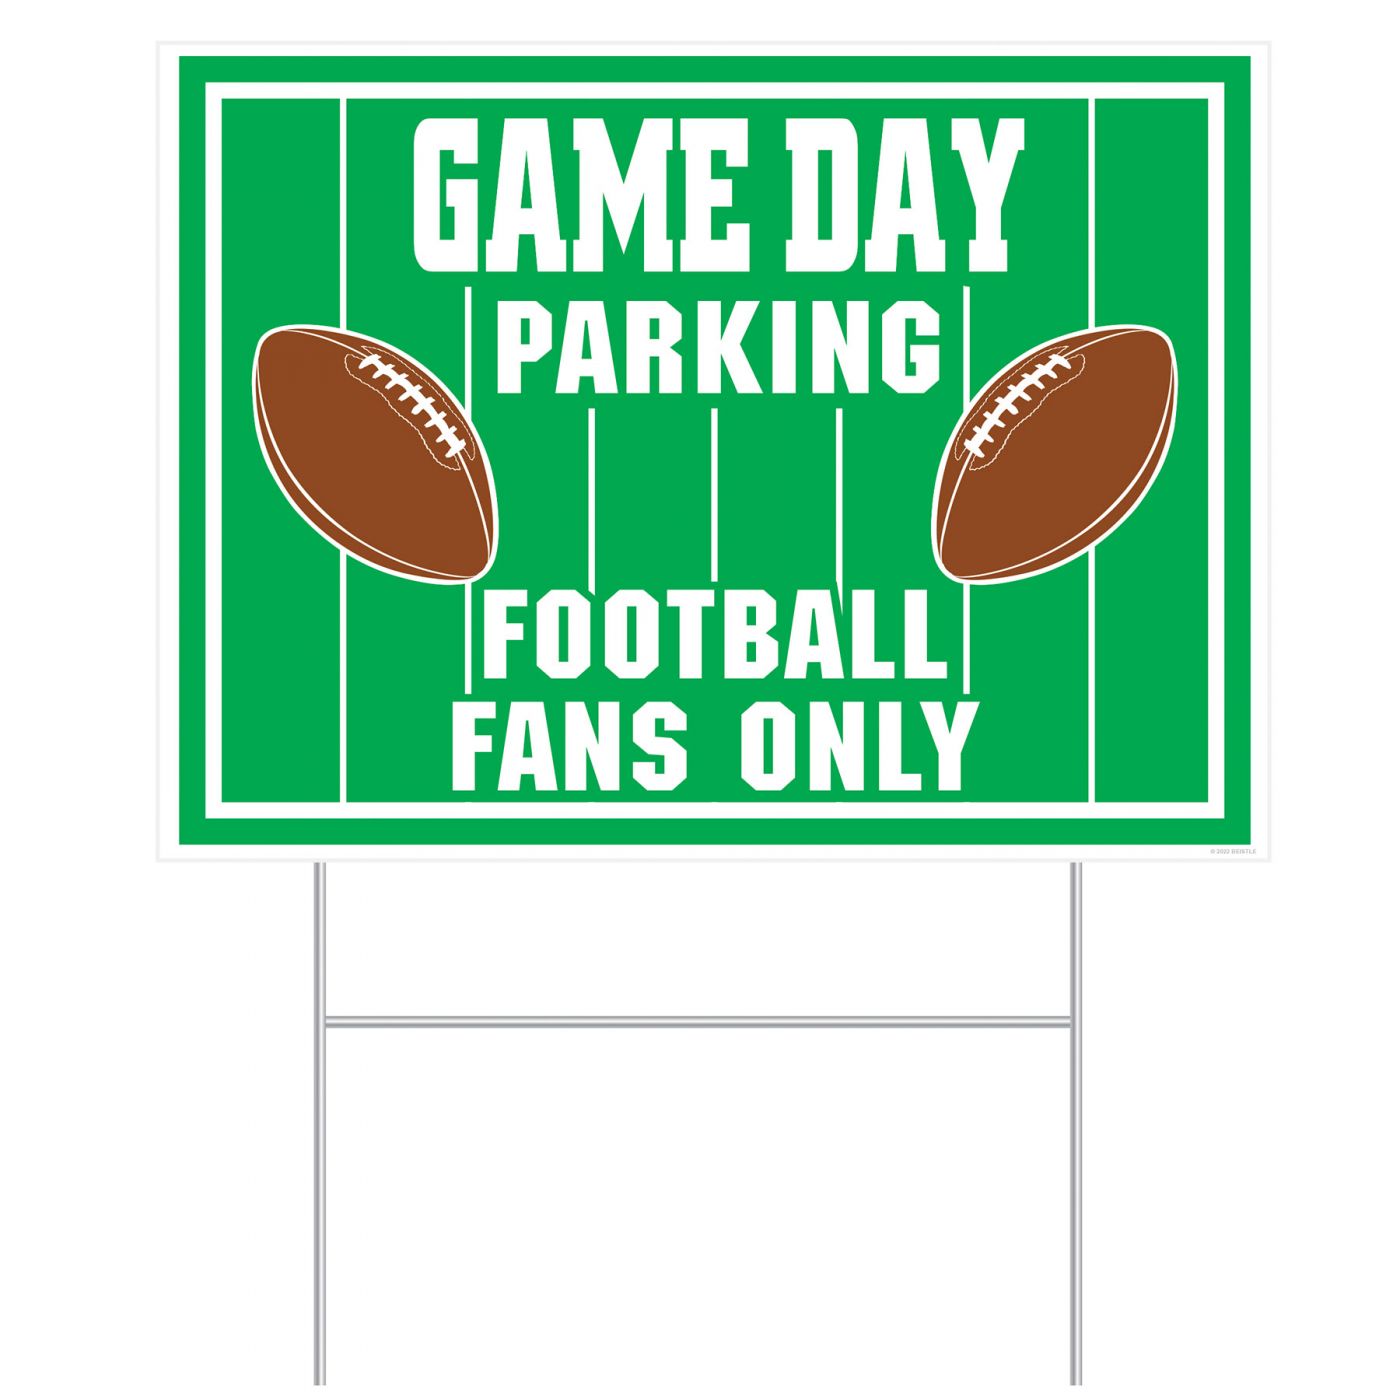 Plastic Game Day Parking Yard Sign (6) image